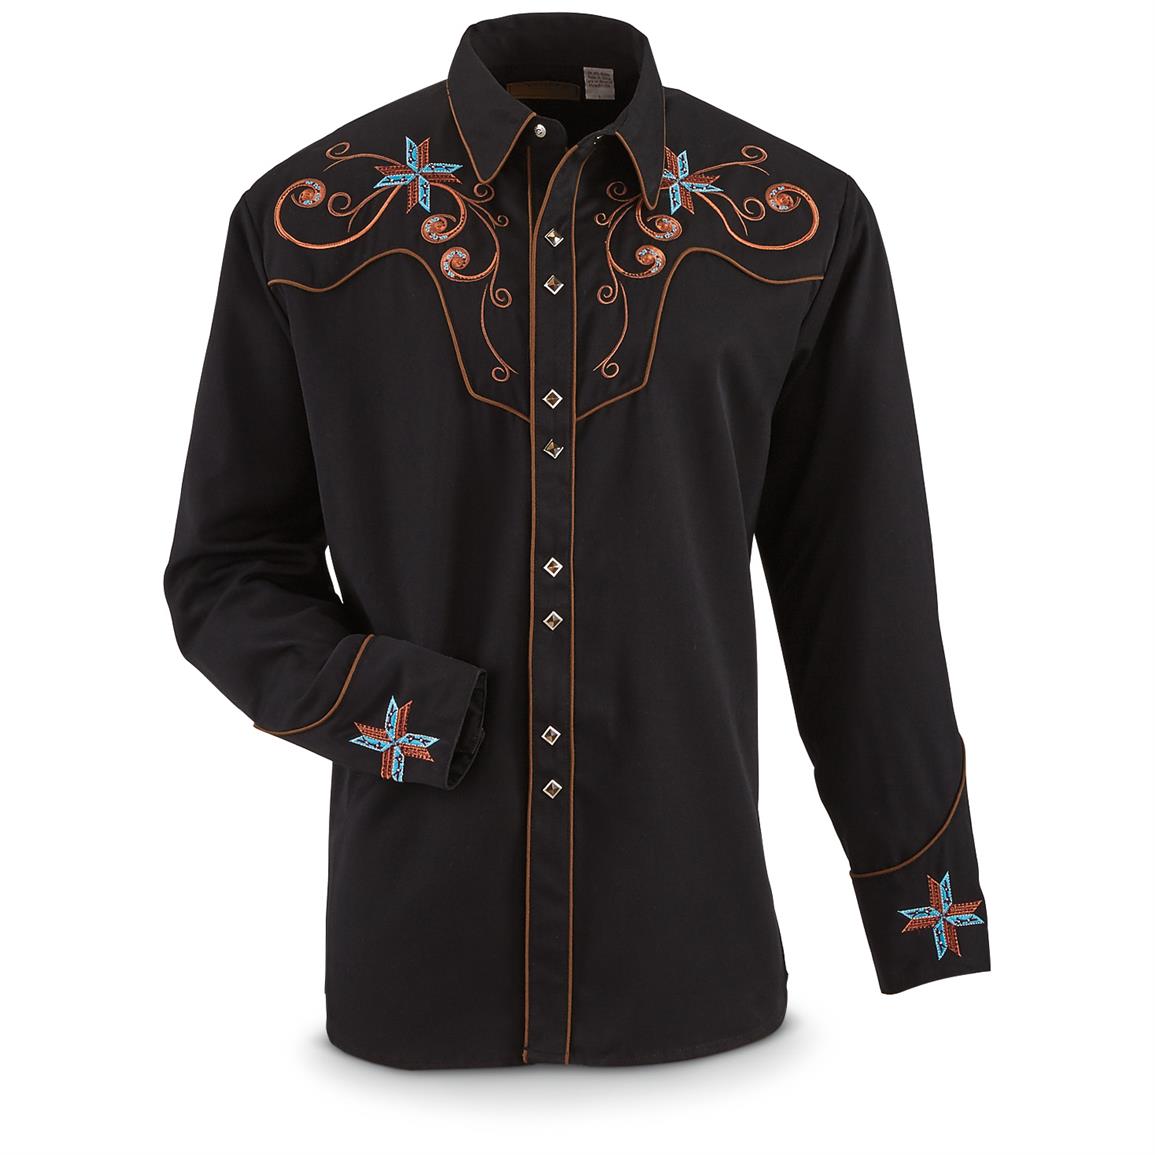 Scully Men's Scroll and Cross Shirt - 670019, Shirts at Sportsman's Guide